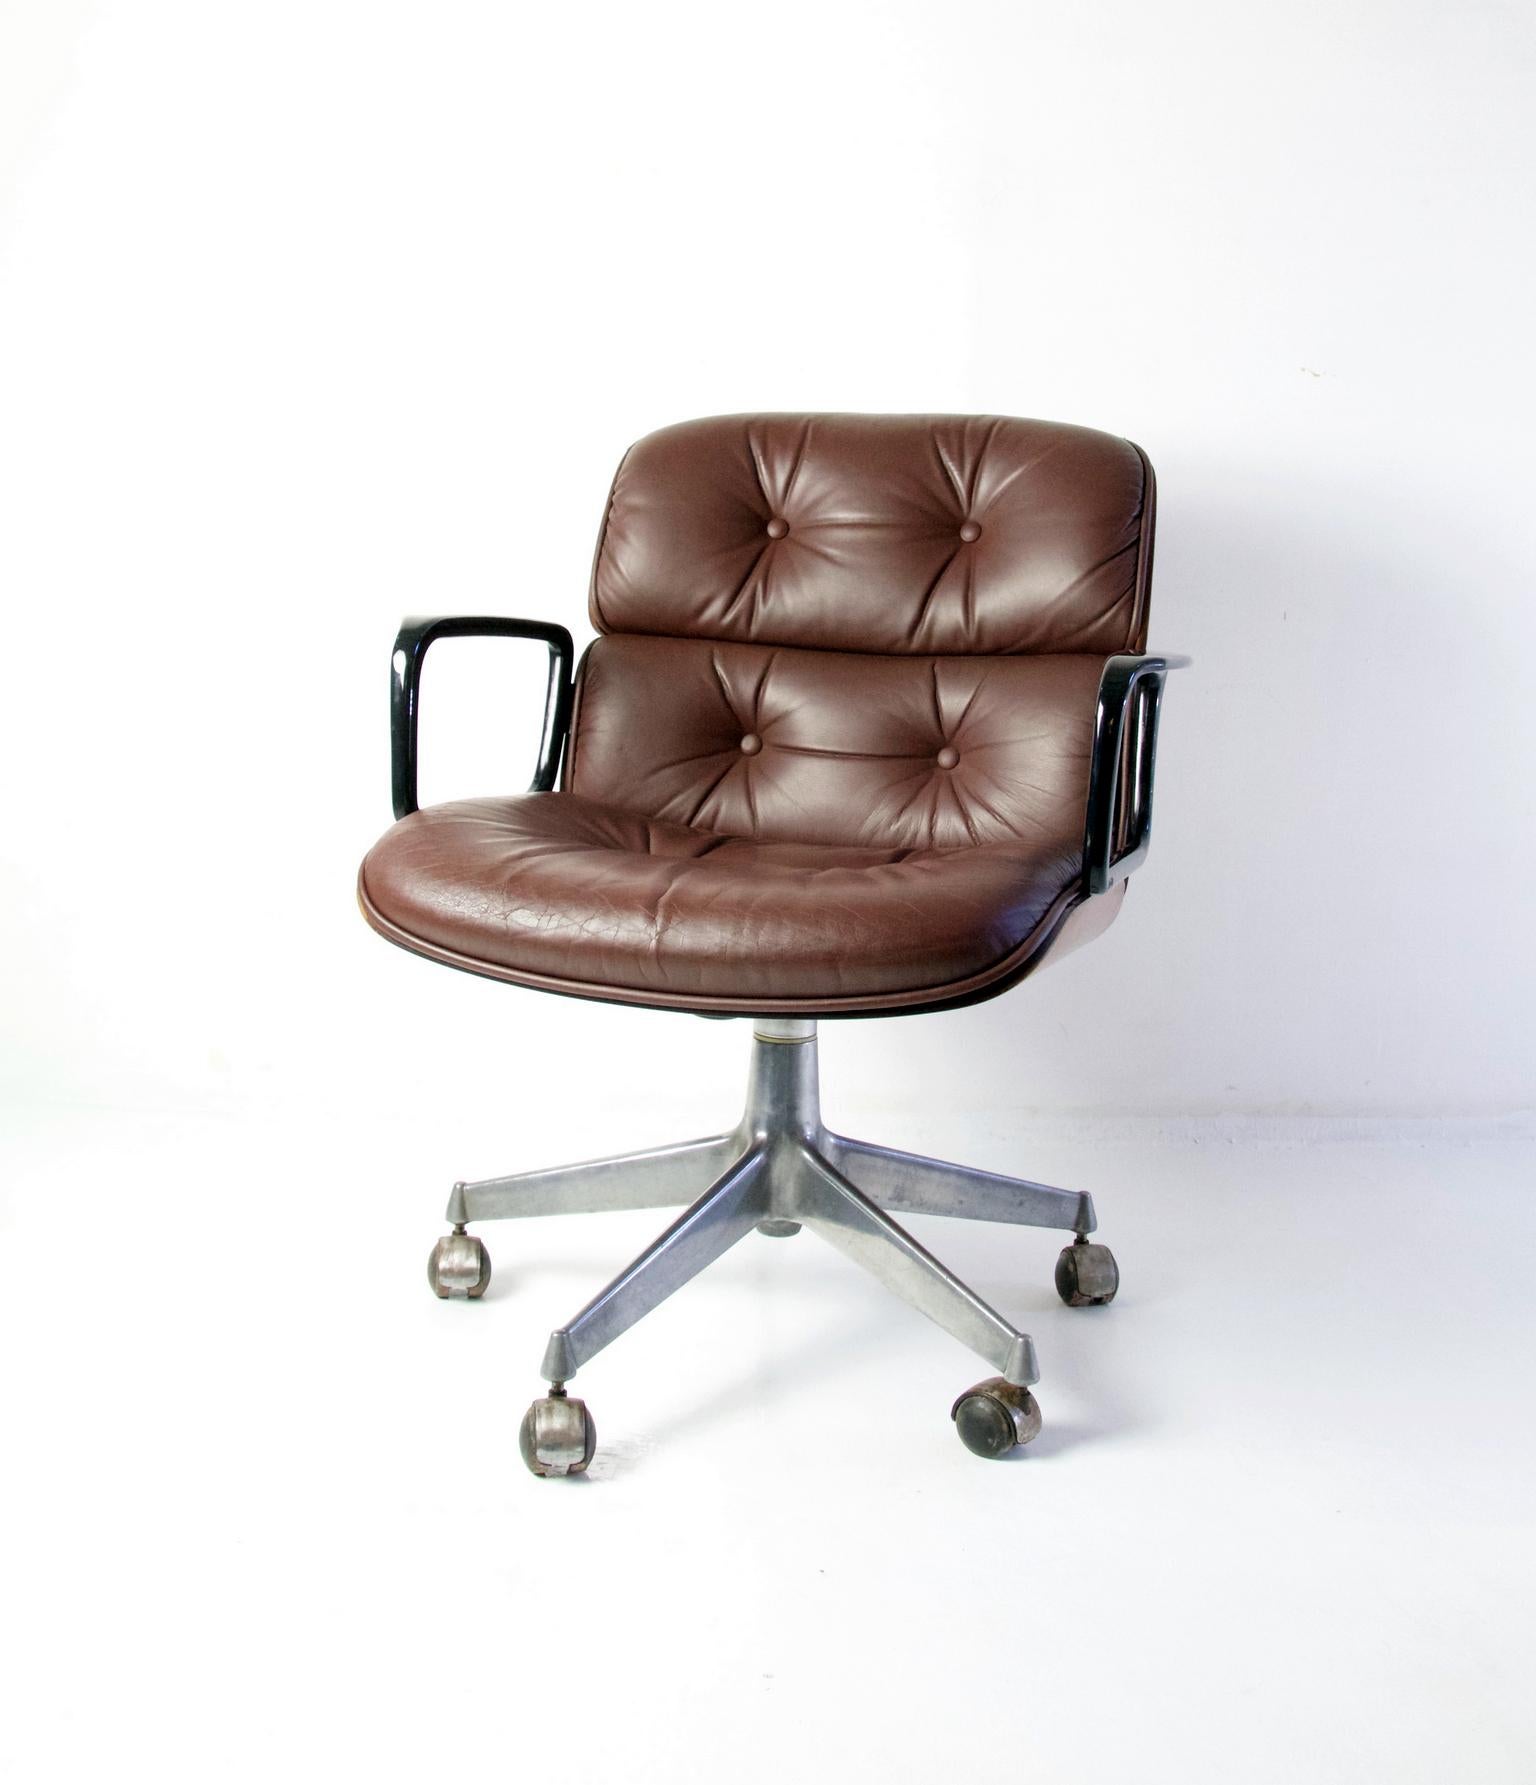 Designed by Ico Parisi 1958 for MiM, Rome. In teak, leather and with a five star base in aluminium on wheels. The chair has an adjustable seating height of 45-55 cm approximately. Great functionality of wheels etc and overall condition good. Very